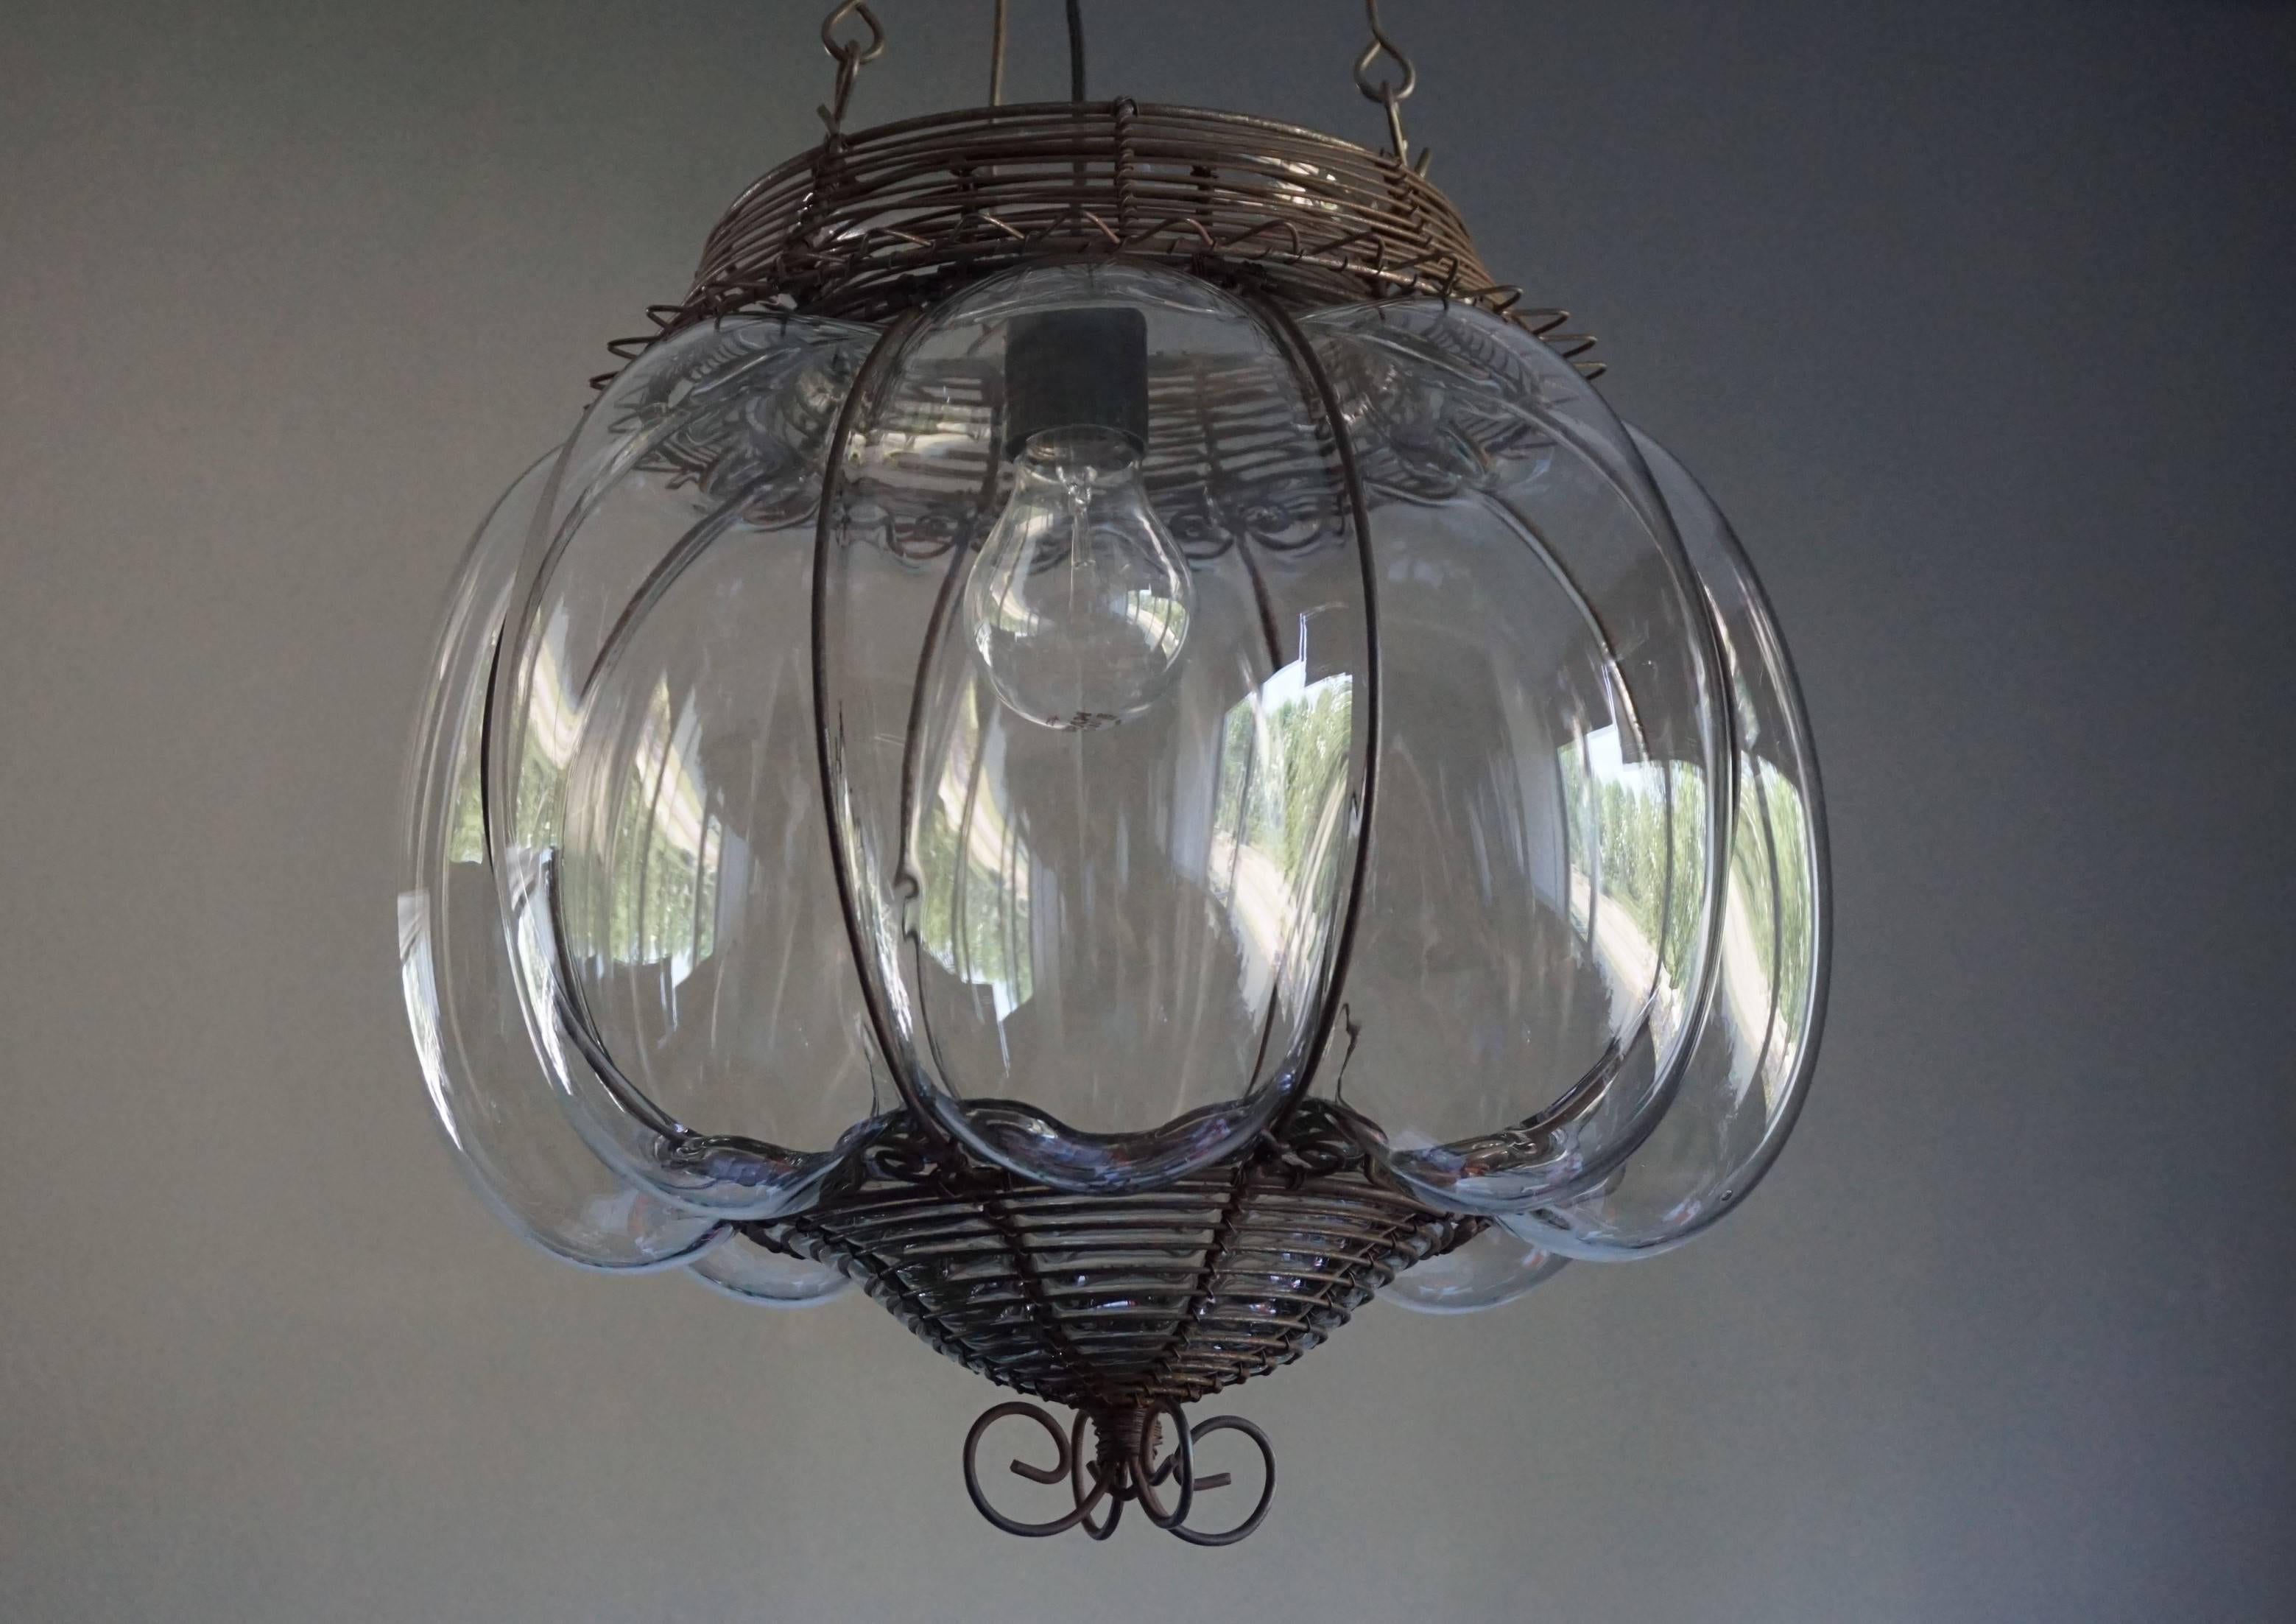 Unique, practical size and highly stylish Venetian chandelier.

Over the years we have sold some very rare and special Venetian pendants and this striking light fixtures is right up there with the most interesting and decorative ones. The